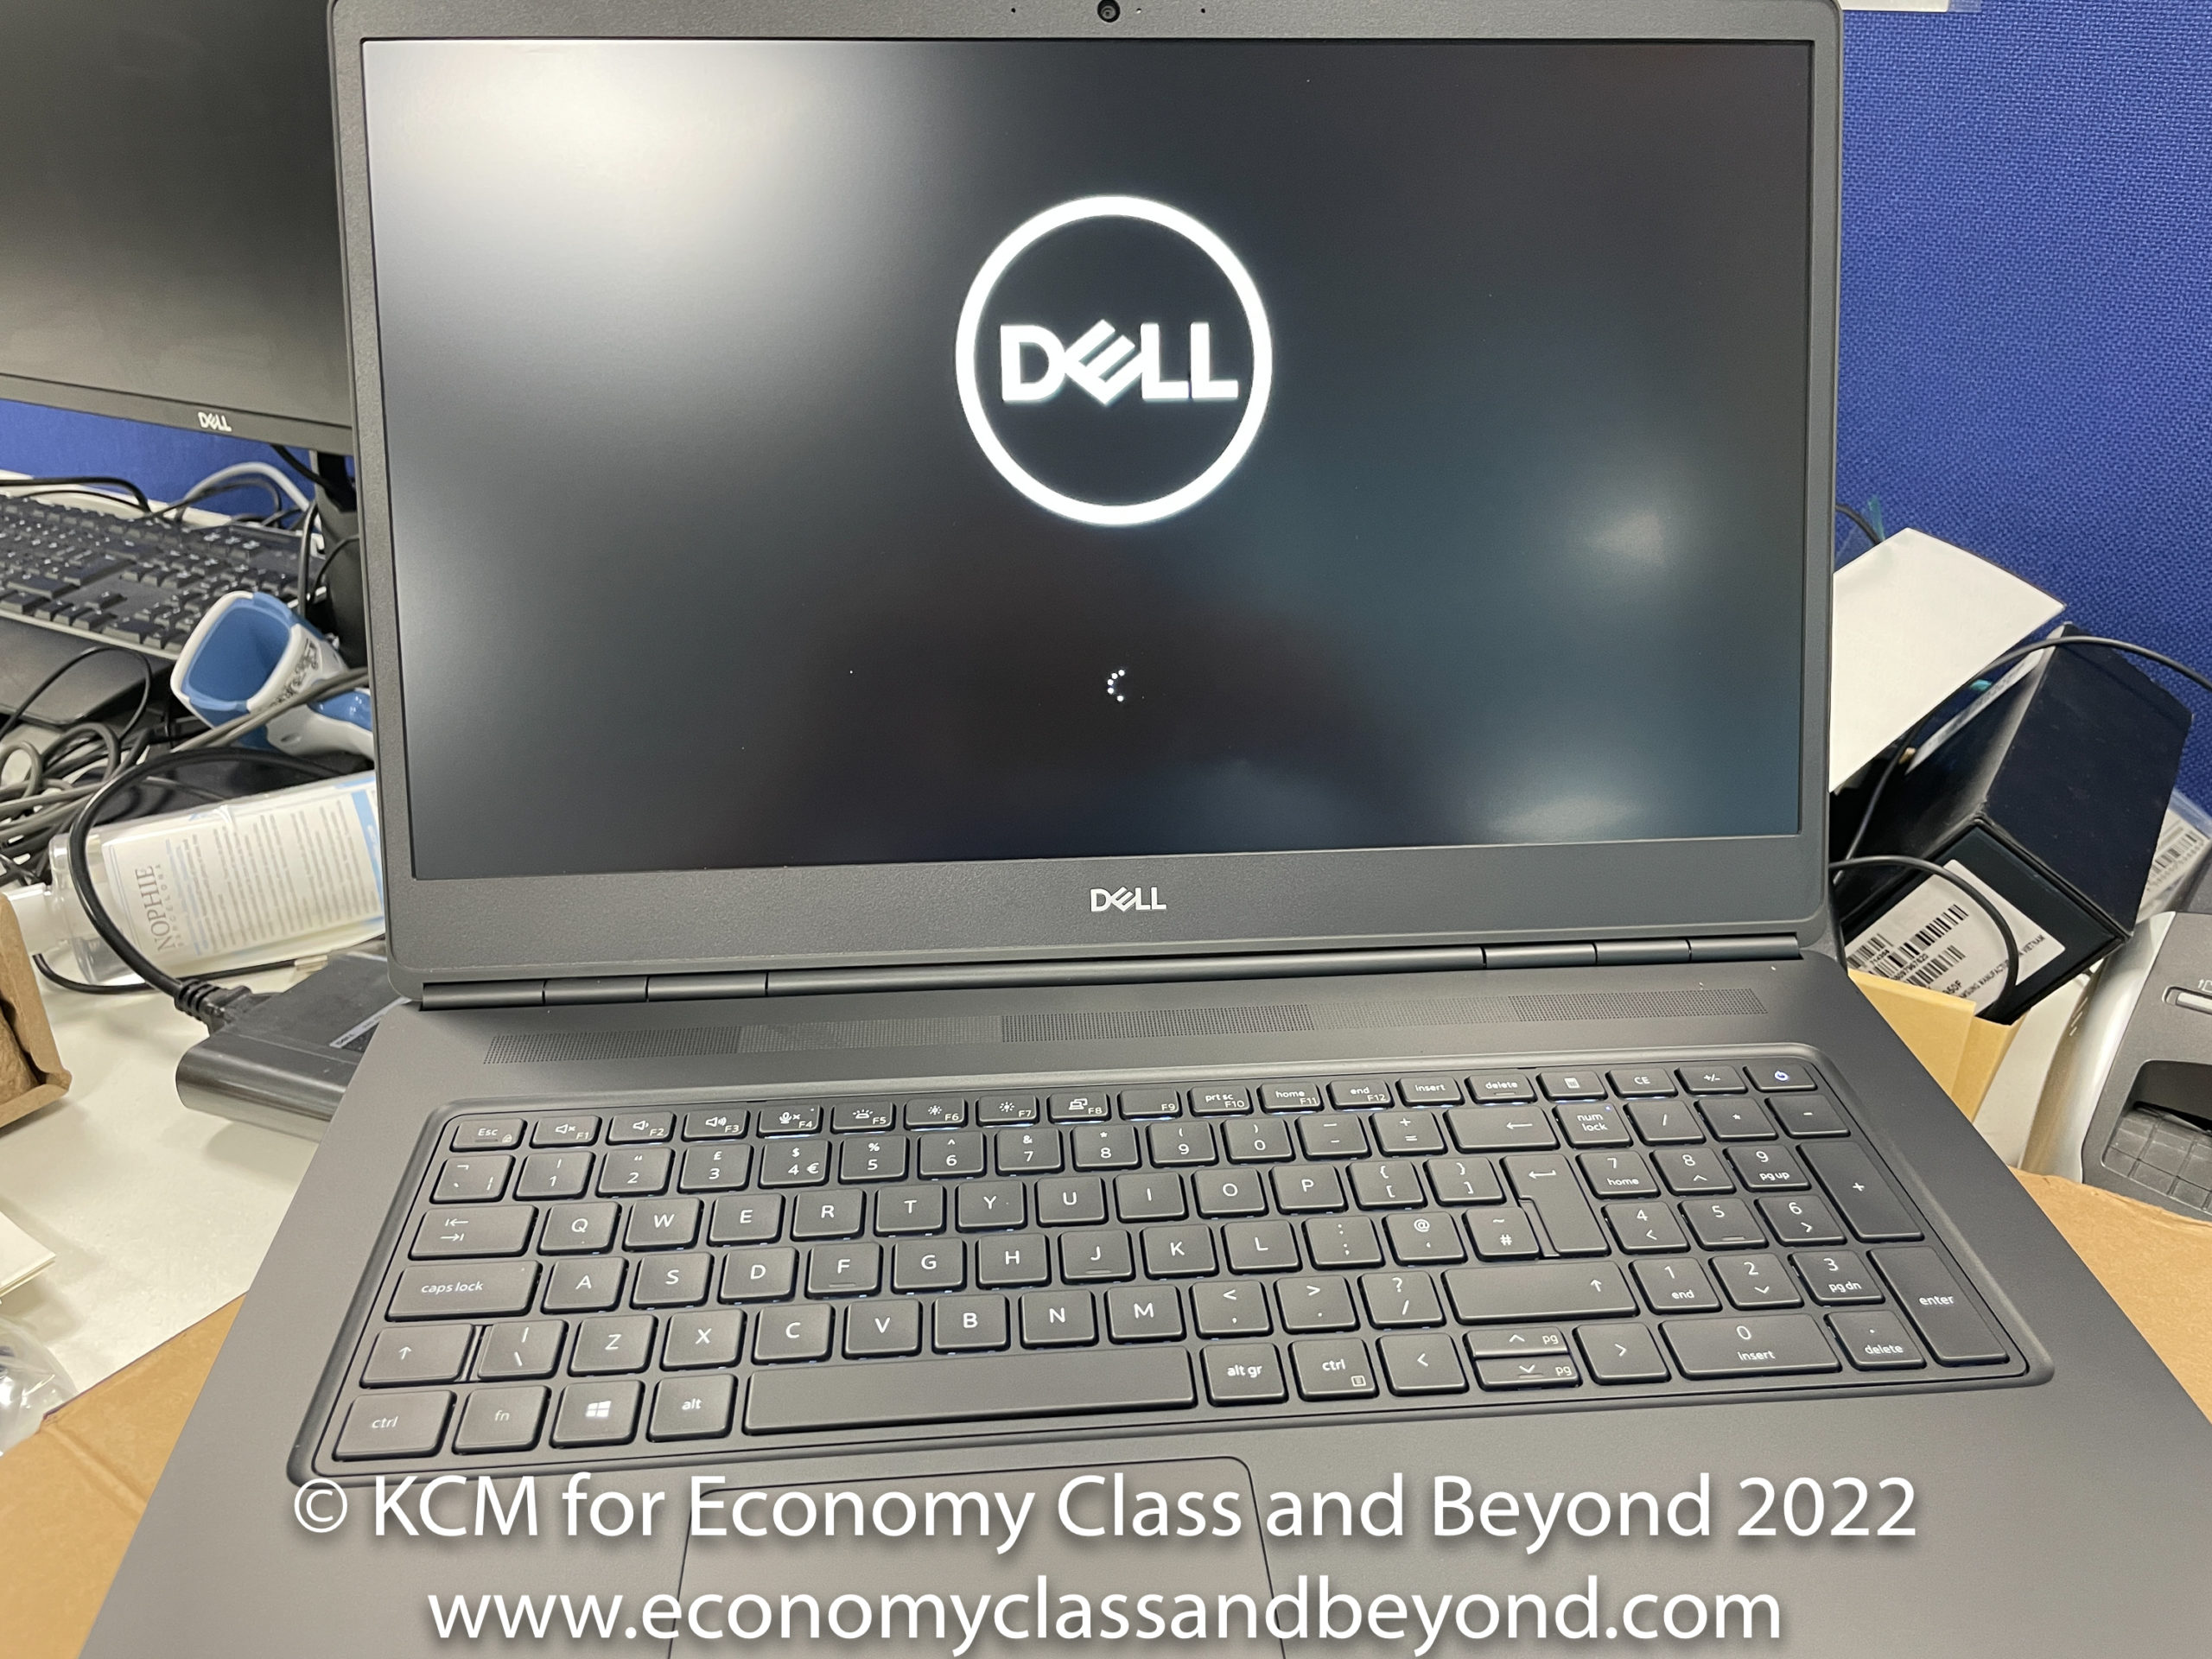 Travel Technology - Dell Precision 7760 - Big Workstation Power, but the  right choice for everyone? - Economy Class & Beyond